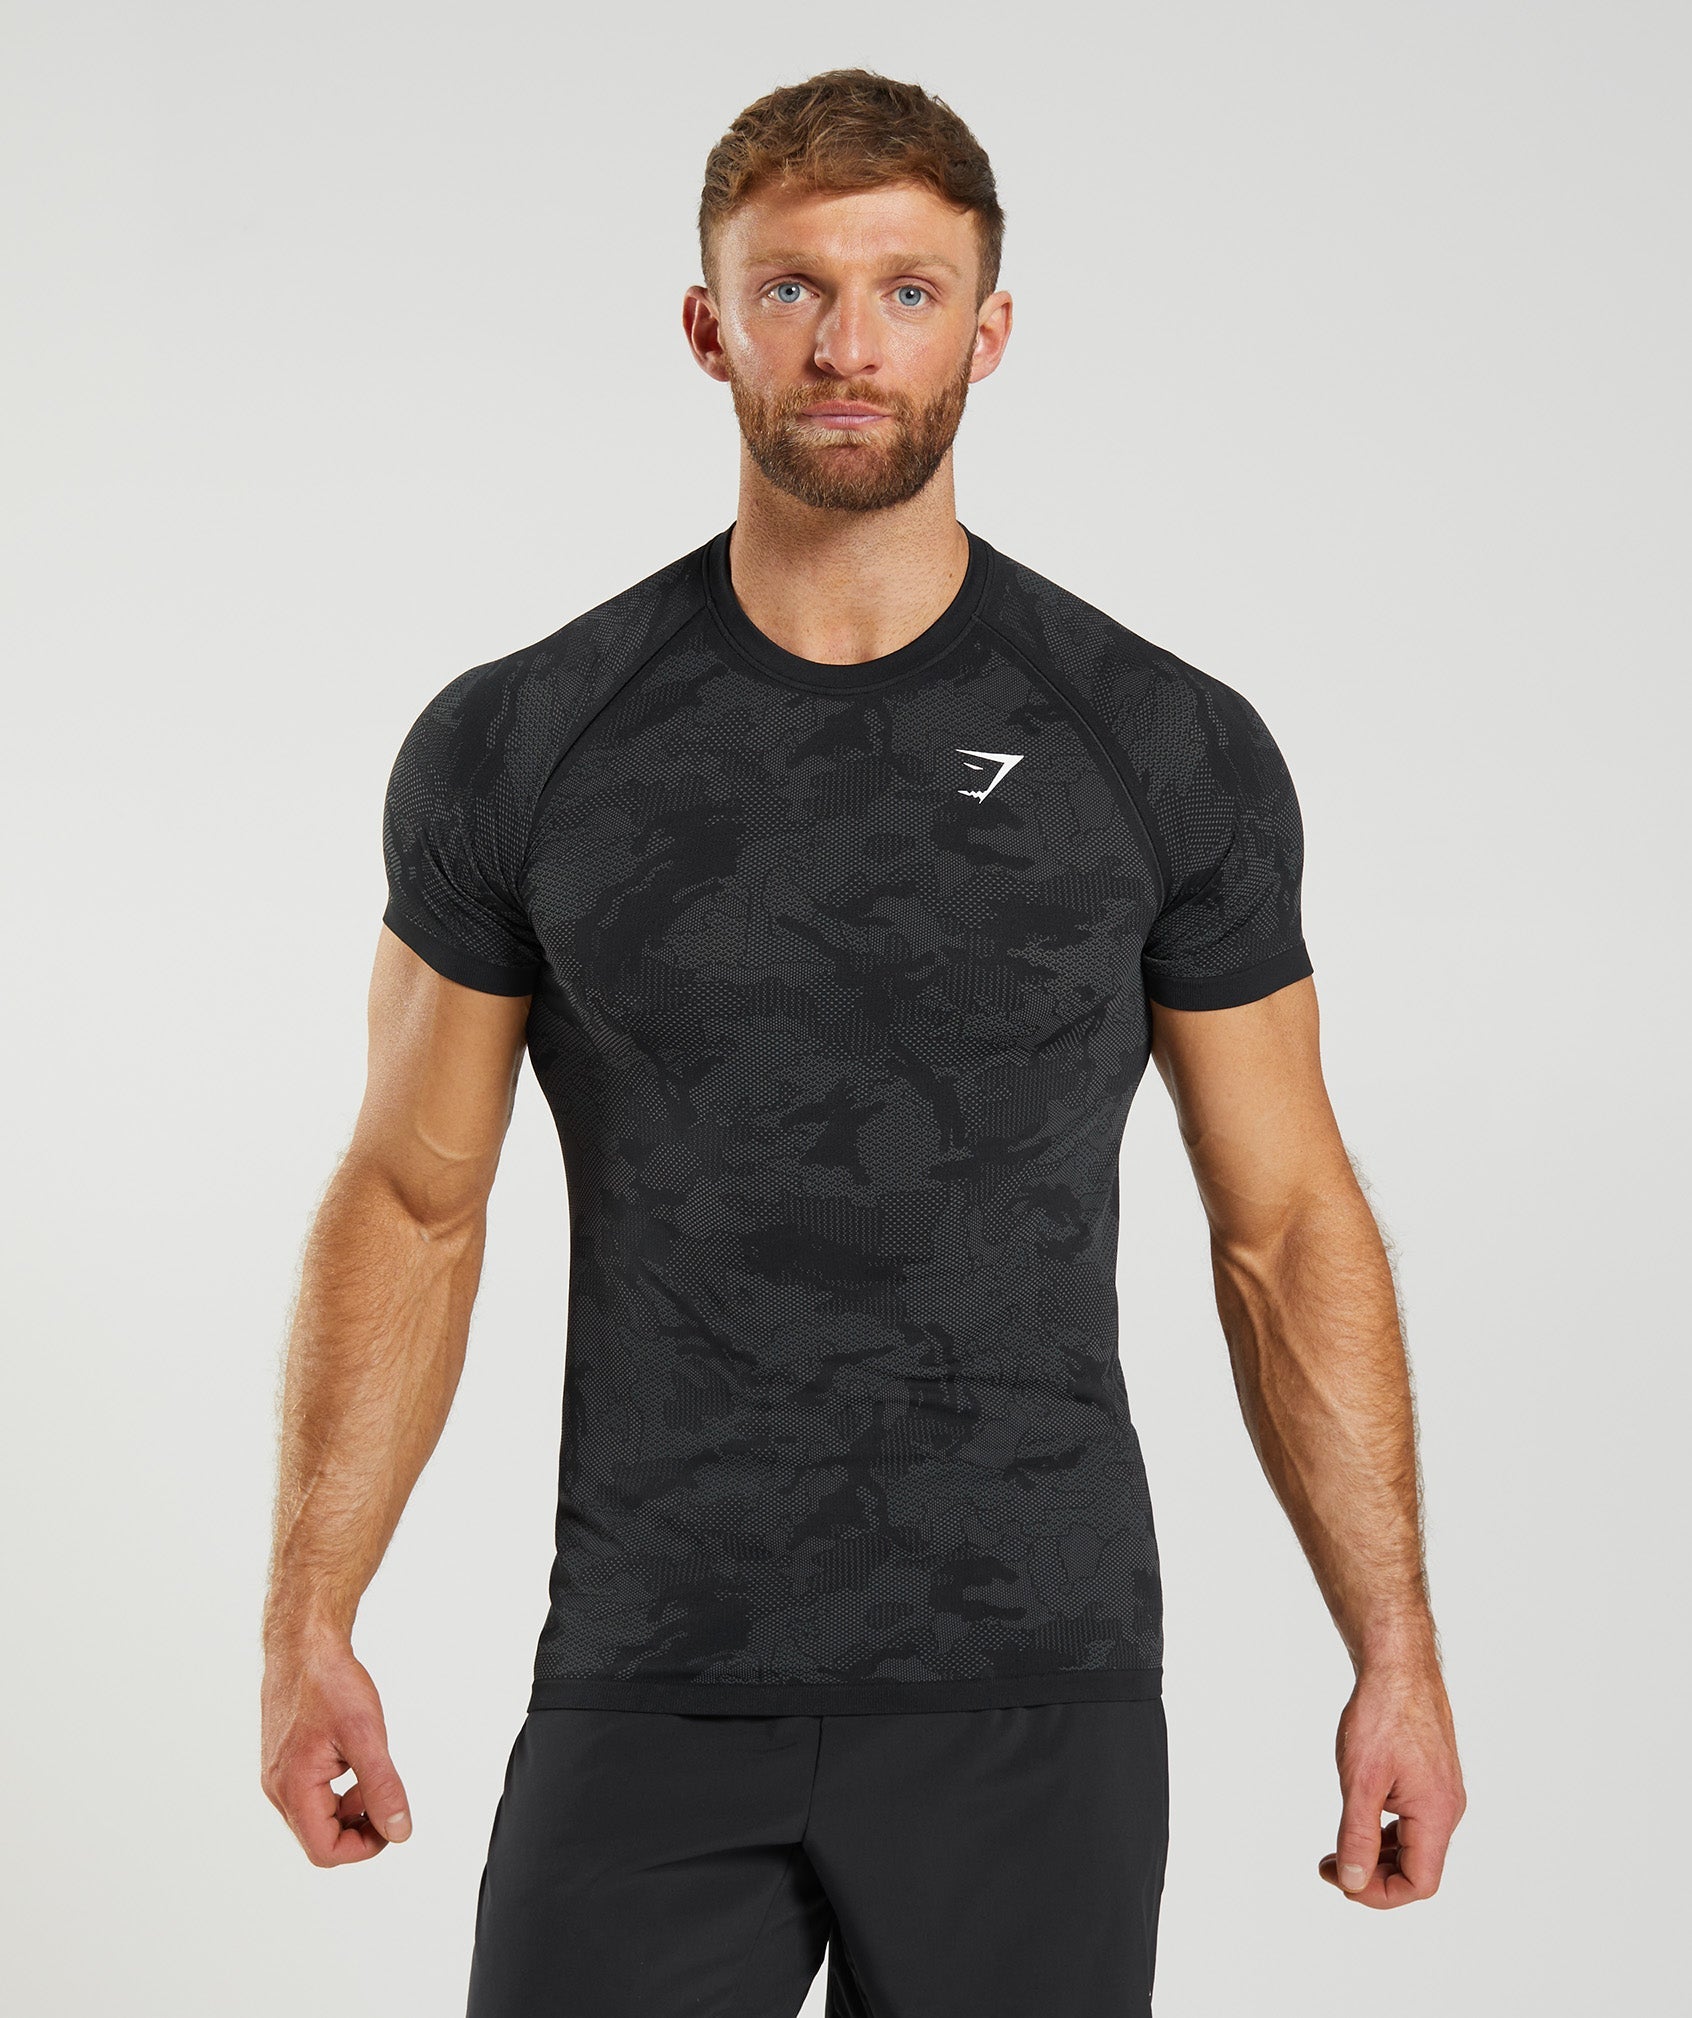 Seamless Clothing  Seamless Gym Wear From Gymshark